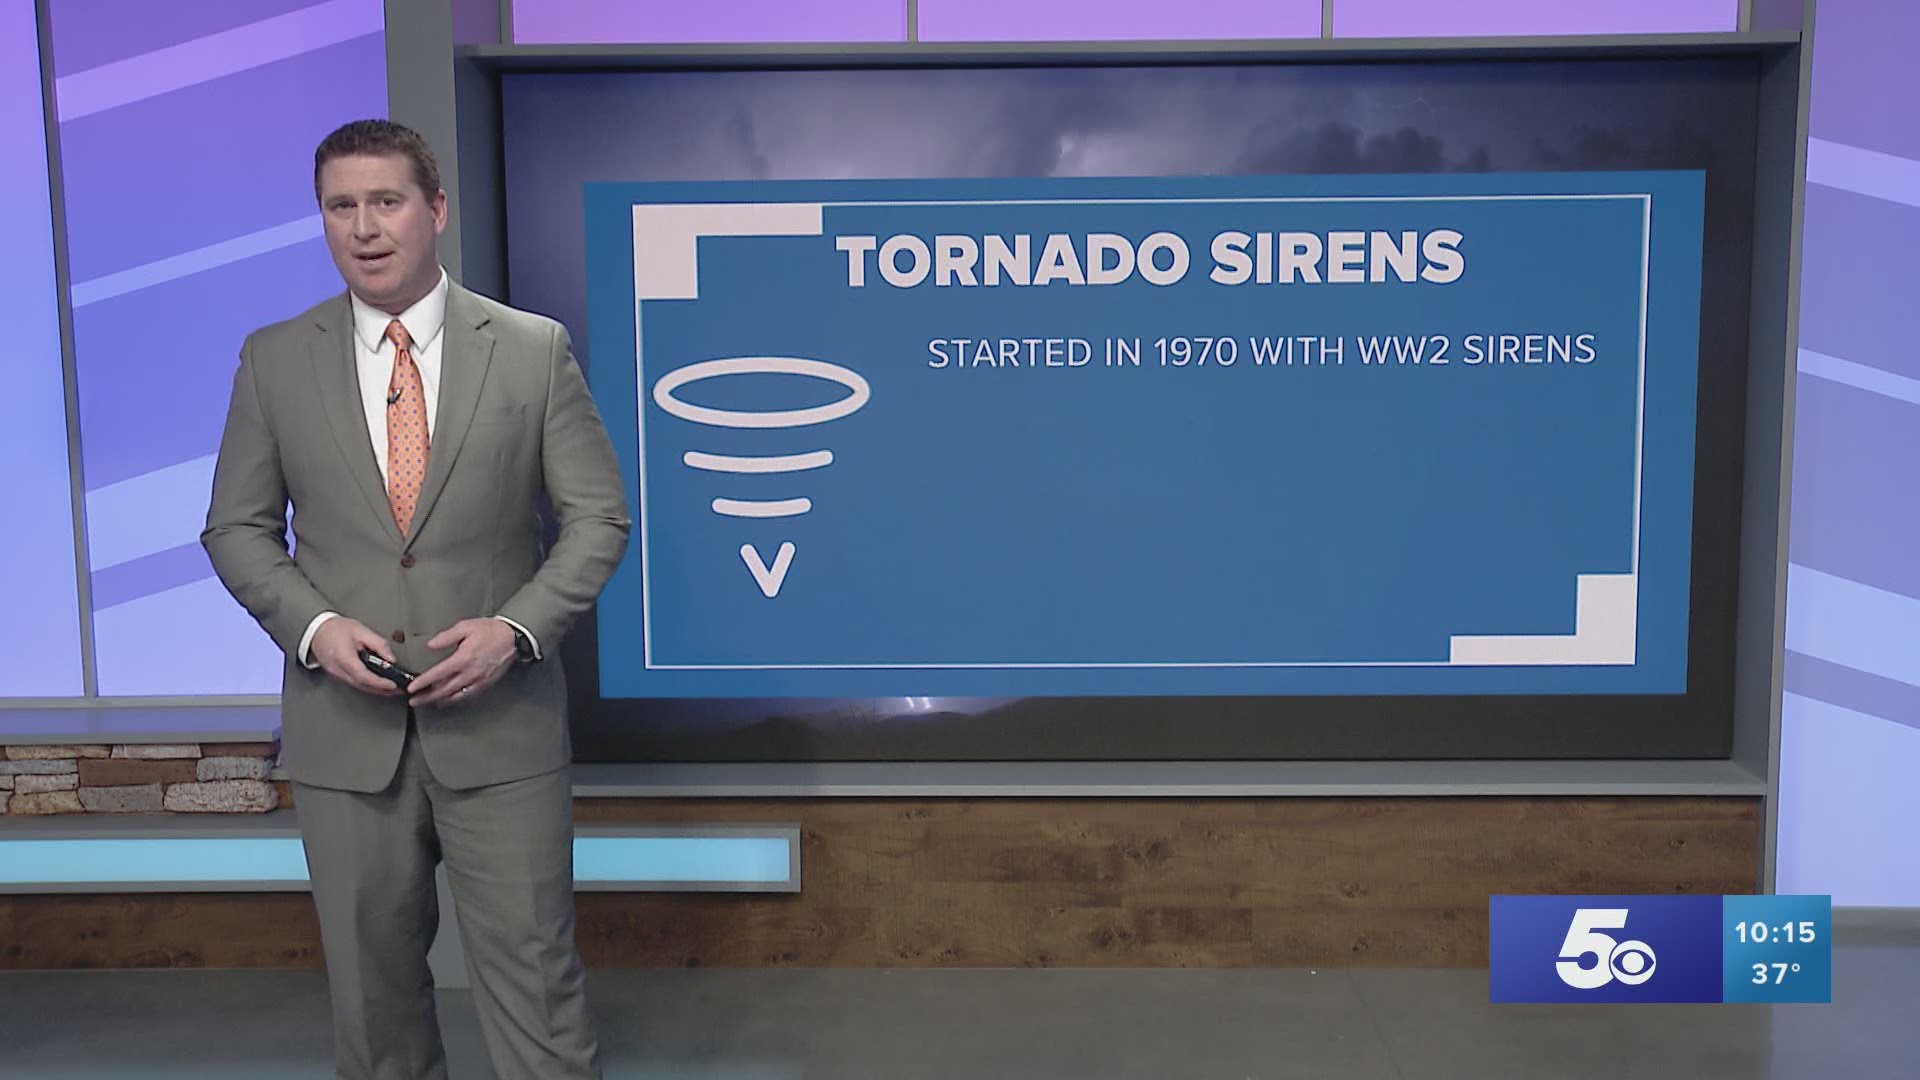 Tornado sirens as a way to receive warning information.